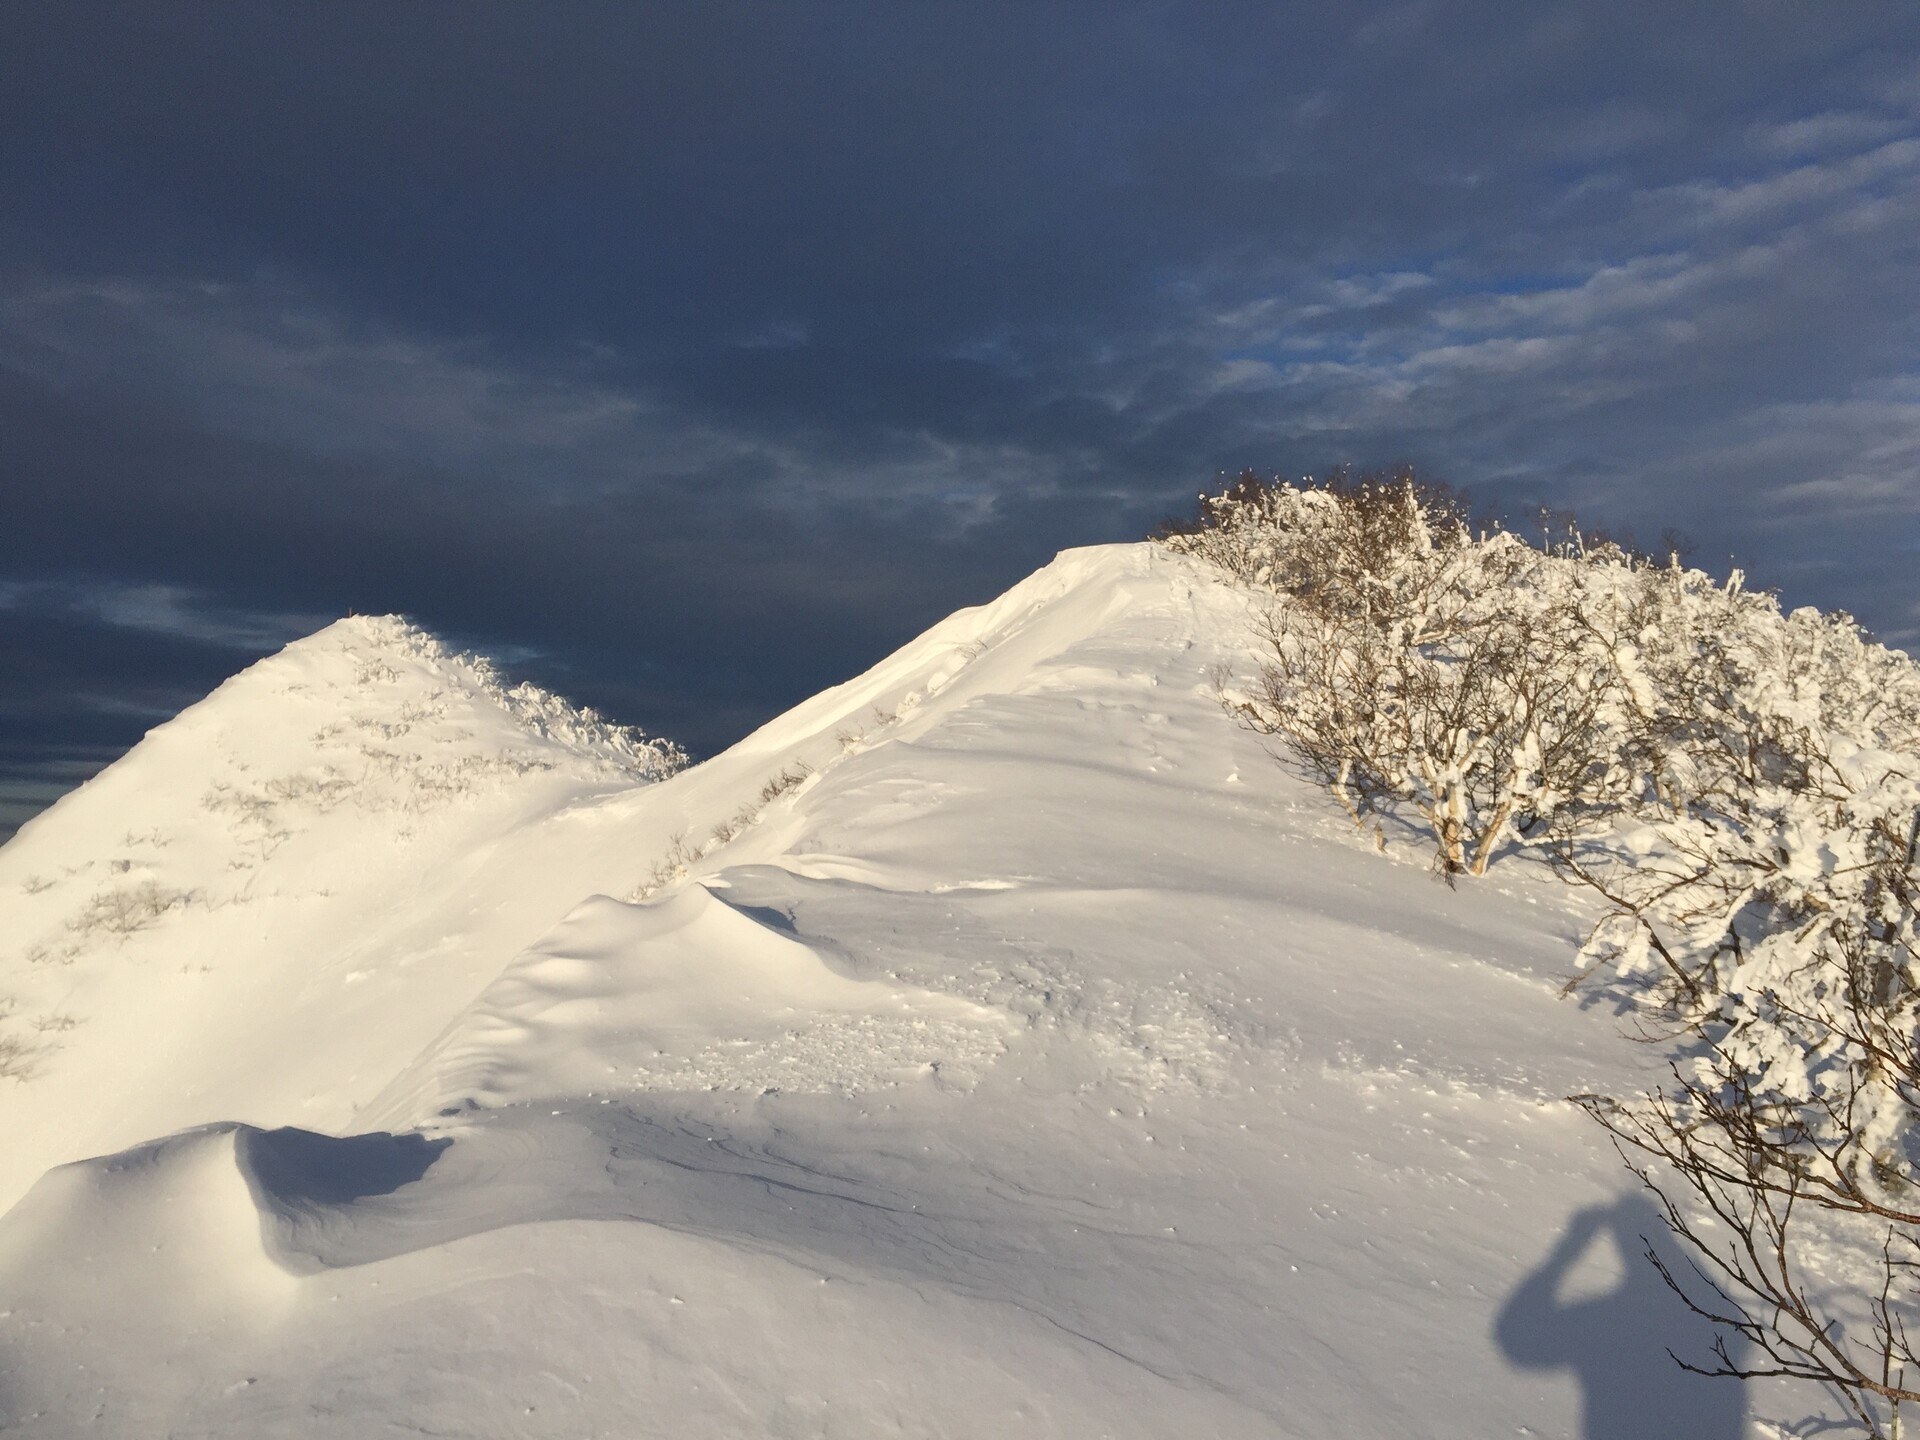 A snowy ridgeline with the sun upon it; dark clouds in the sky beyond